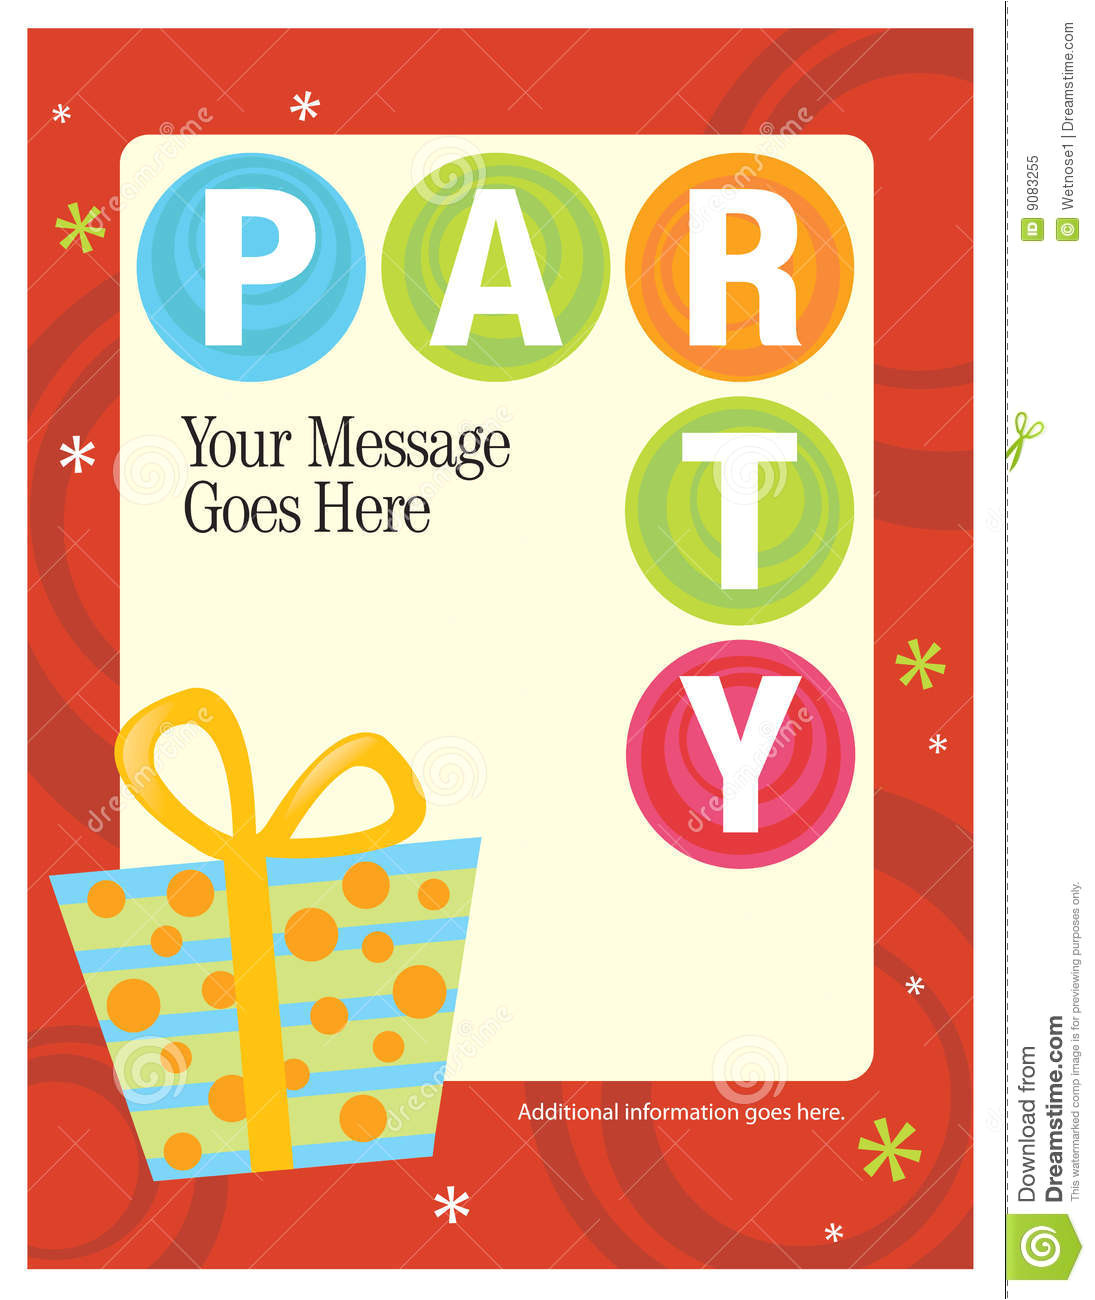 royalty free stock photo 8 5x11 party flyer poster template image9083255